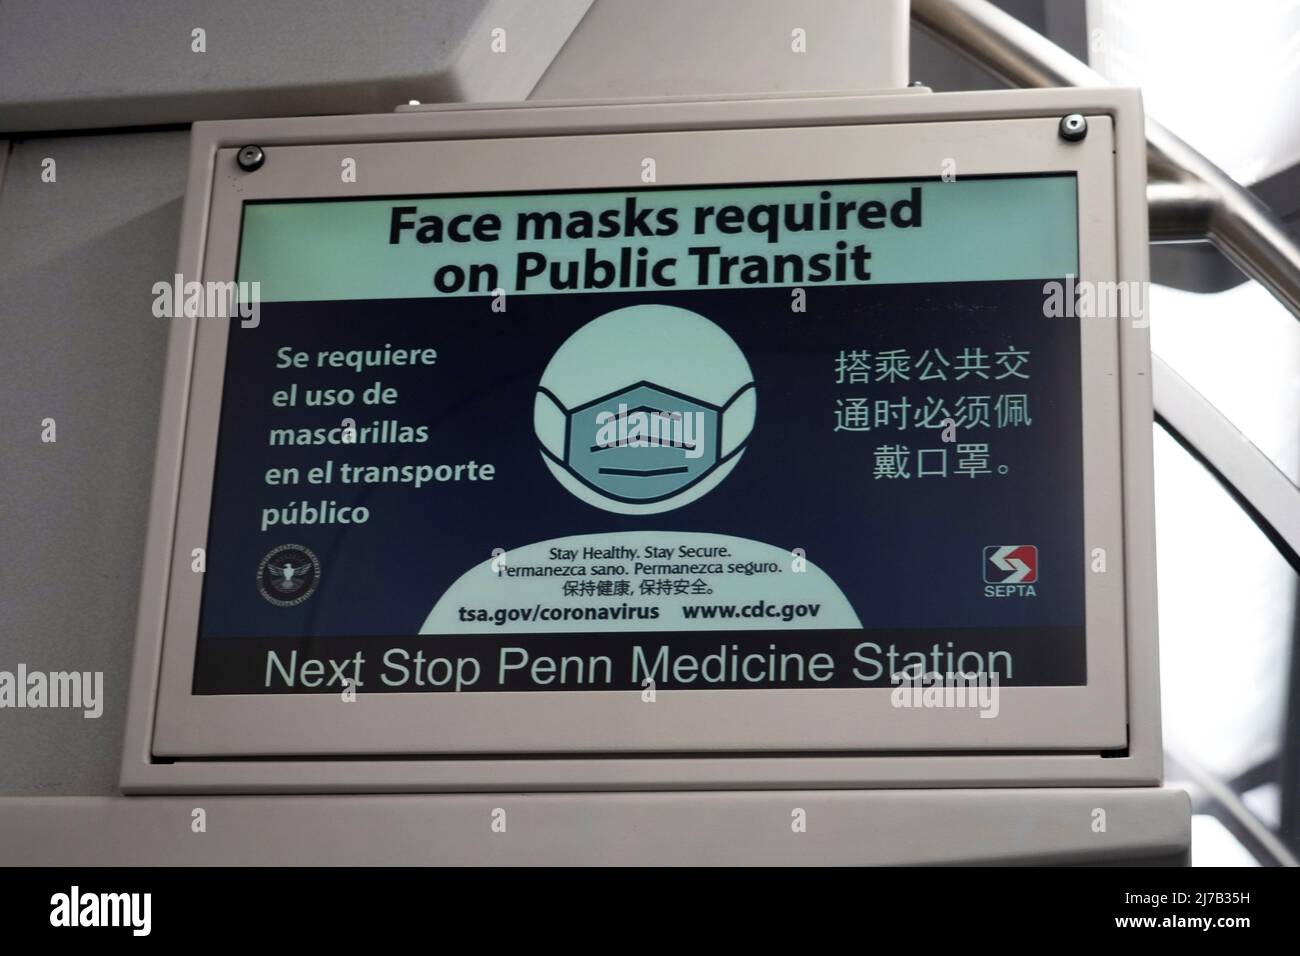 A Face Masks required Sign in English and Spanish on a Southeastern Pennsylvania Transportation Authority (SETTA) train, Friday, Apr 29, 2022, in Phi Foto Stock